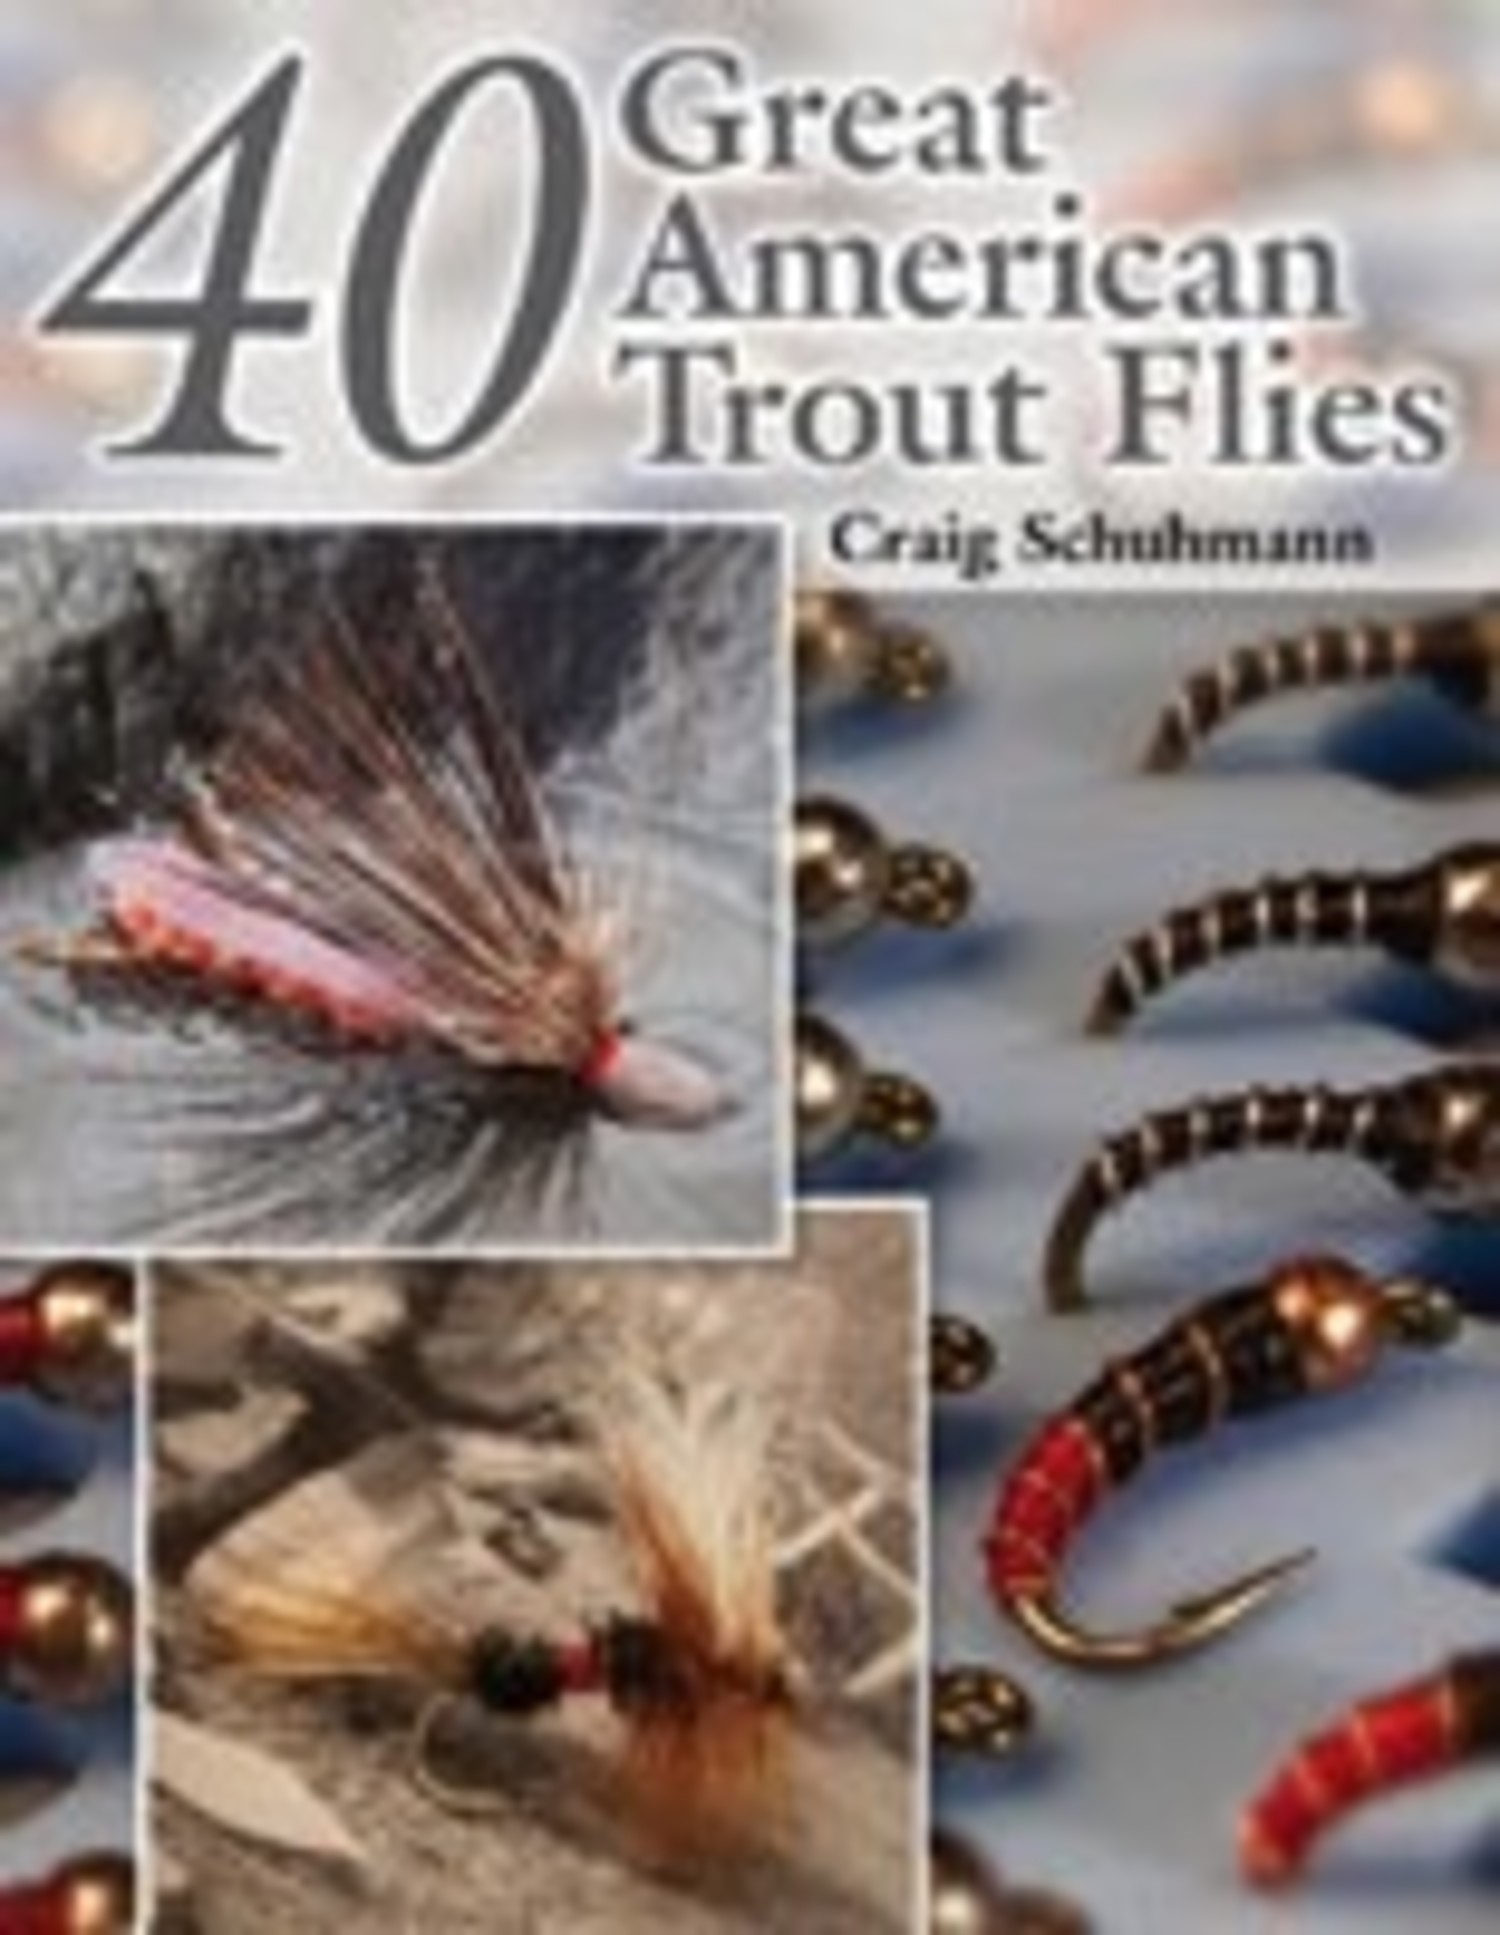 40 Great American Trout Flies - Royal Treatment Fly Fishing